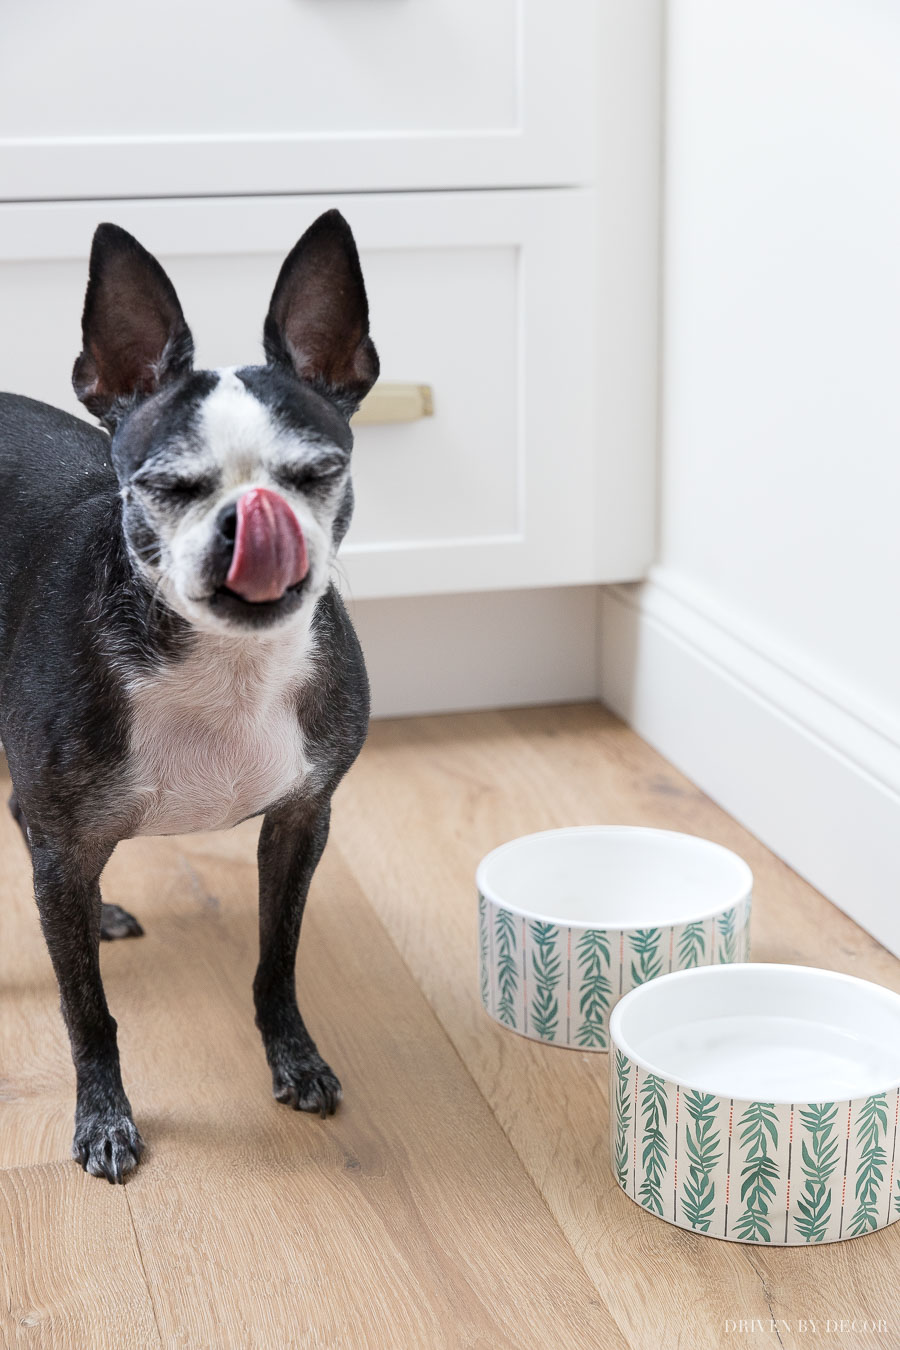 These are just the cutest patterned dog bowls! Part of Drew Barrymore's Flower Home collection!